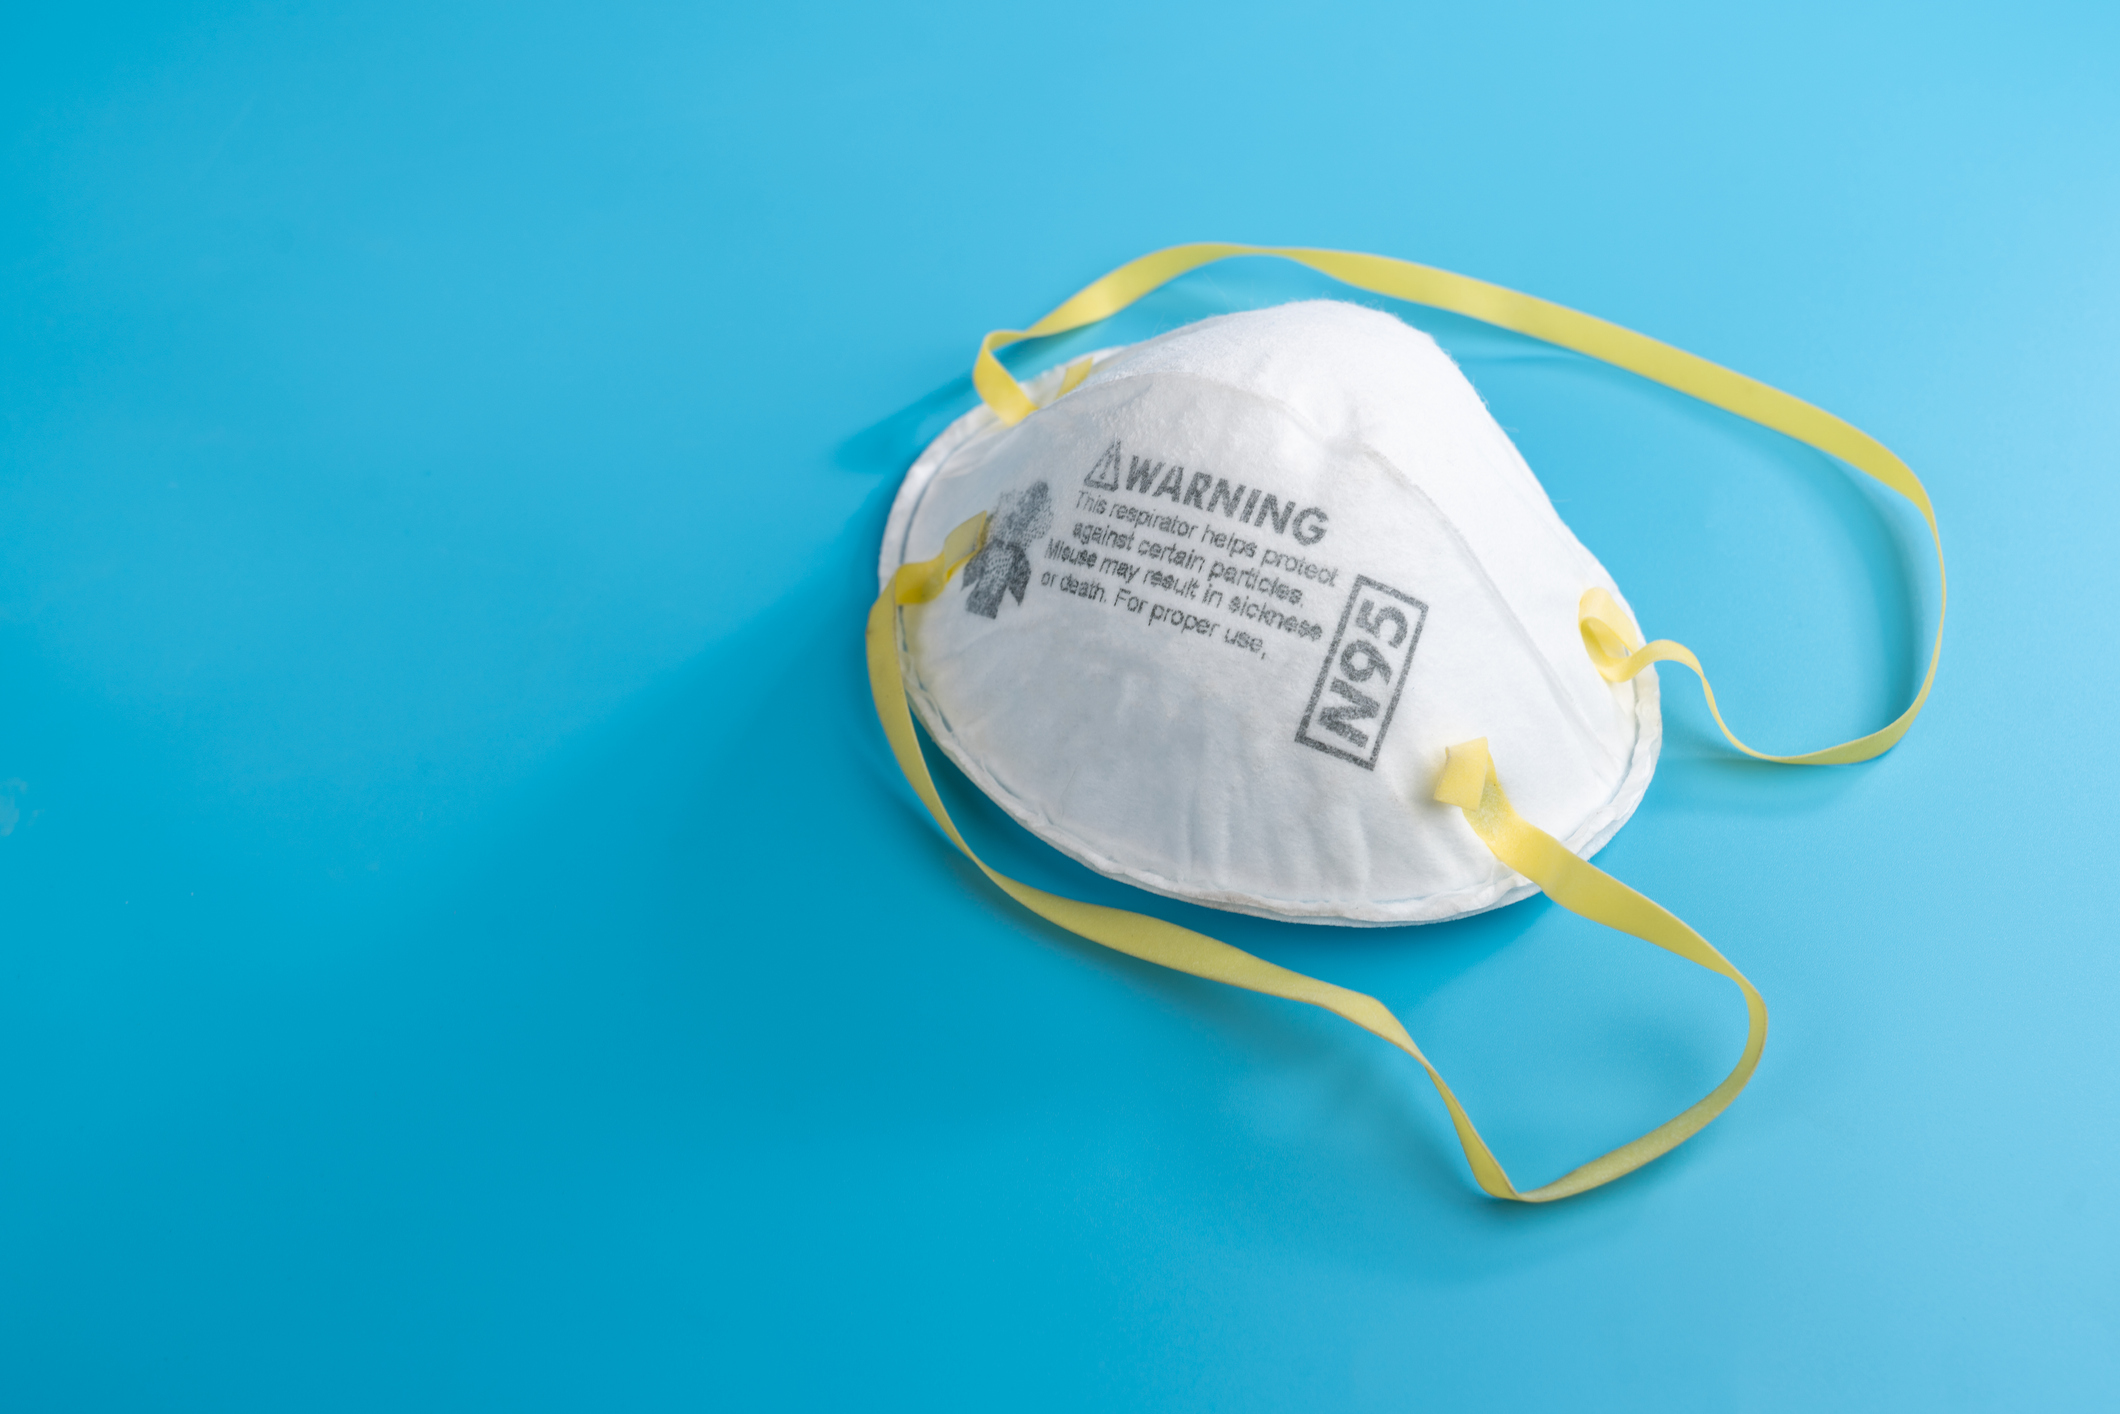 N95 Respirators and Surgical Masks (Face Masks). White medical mask isolate. Face mask protection against pollution, virus, flu and coronavirus. Health care and surgical concept.